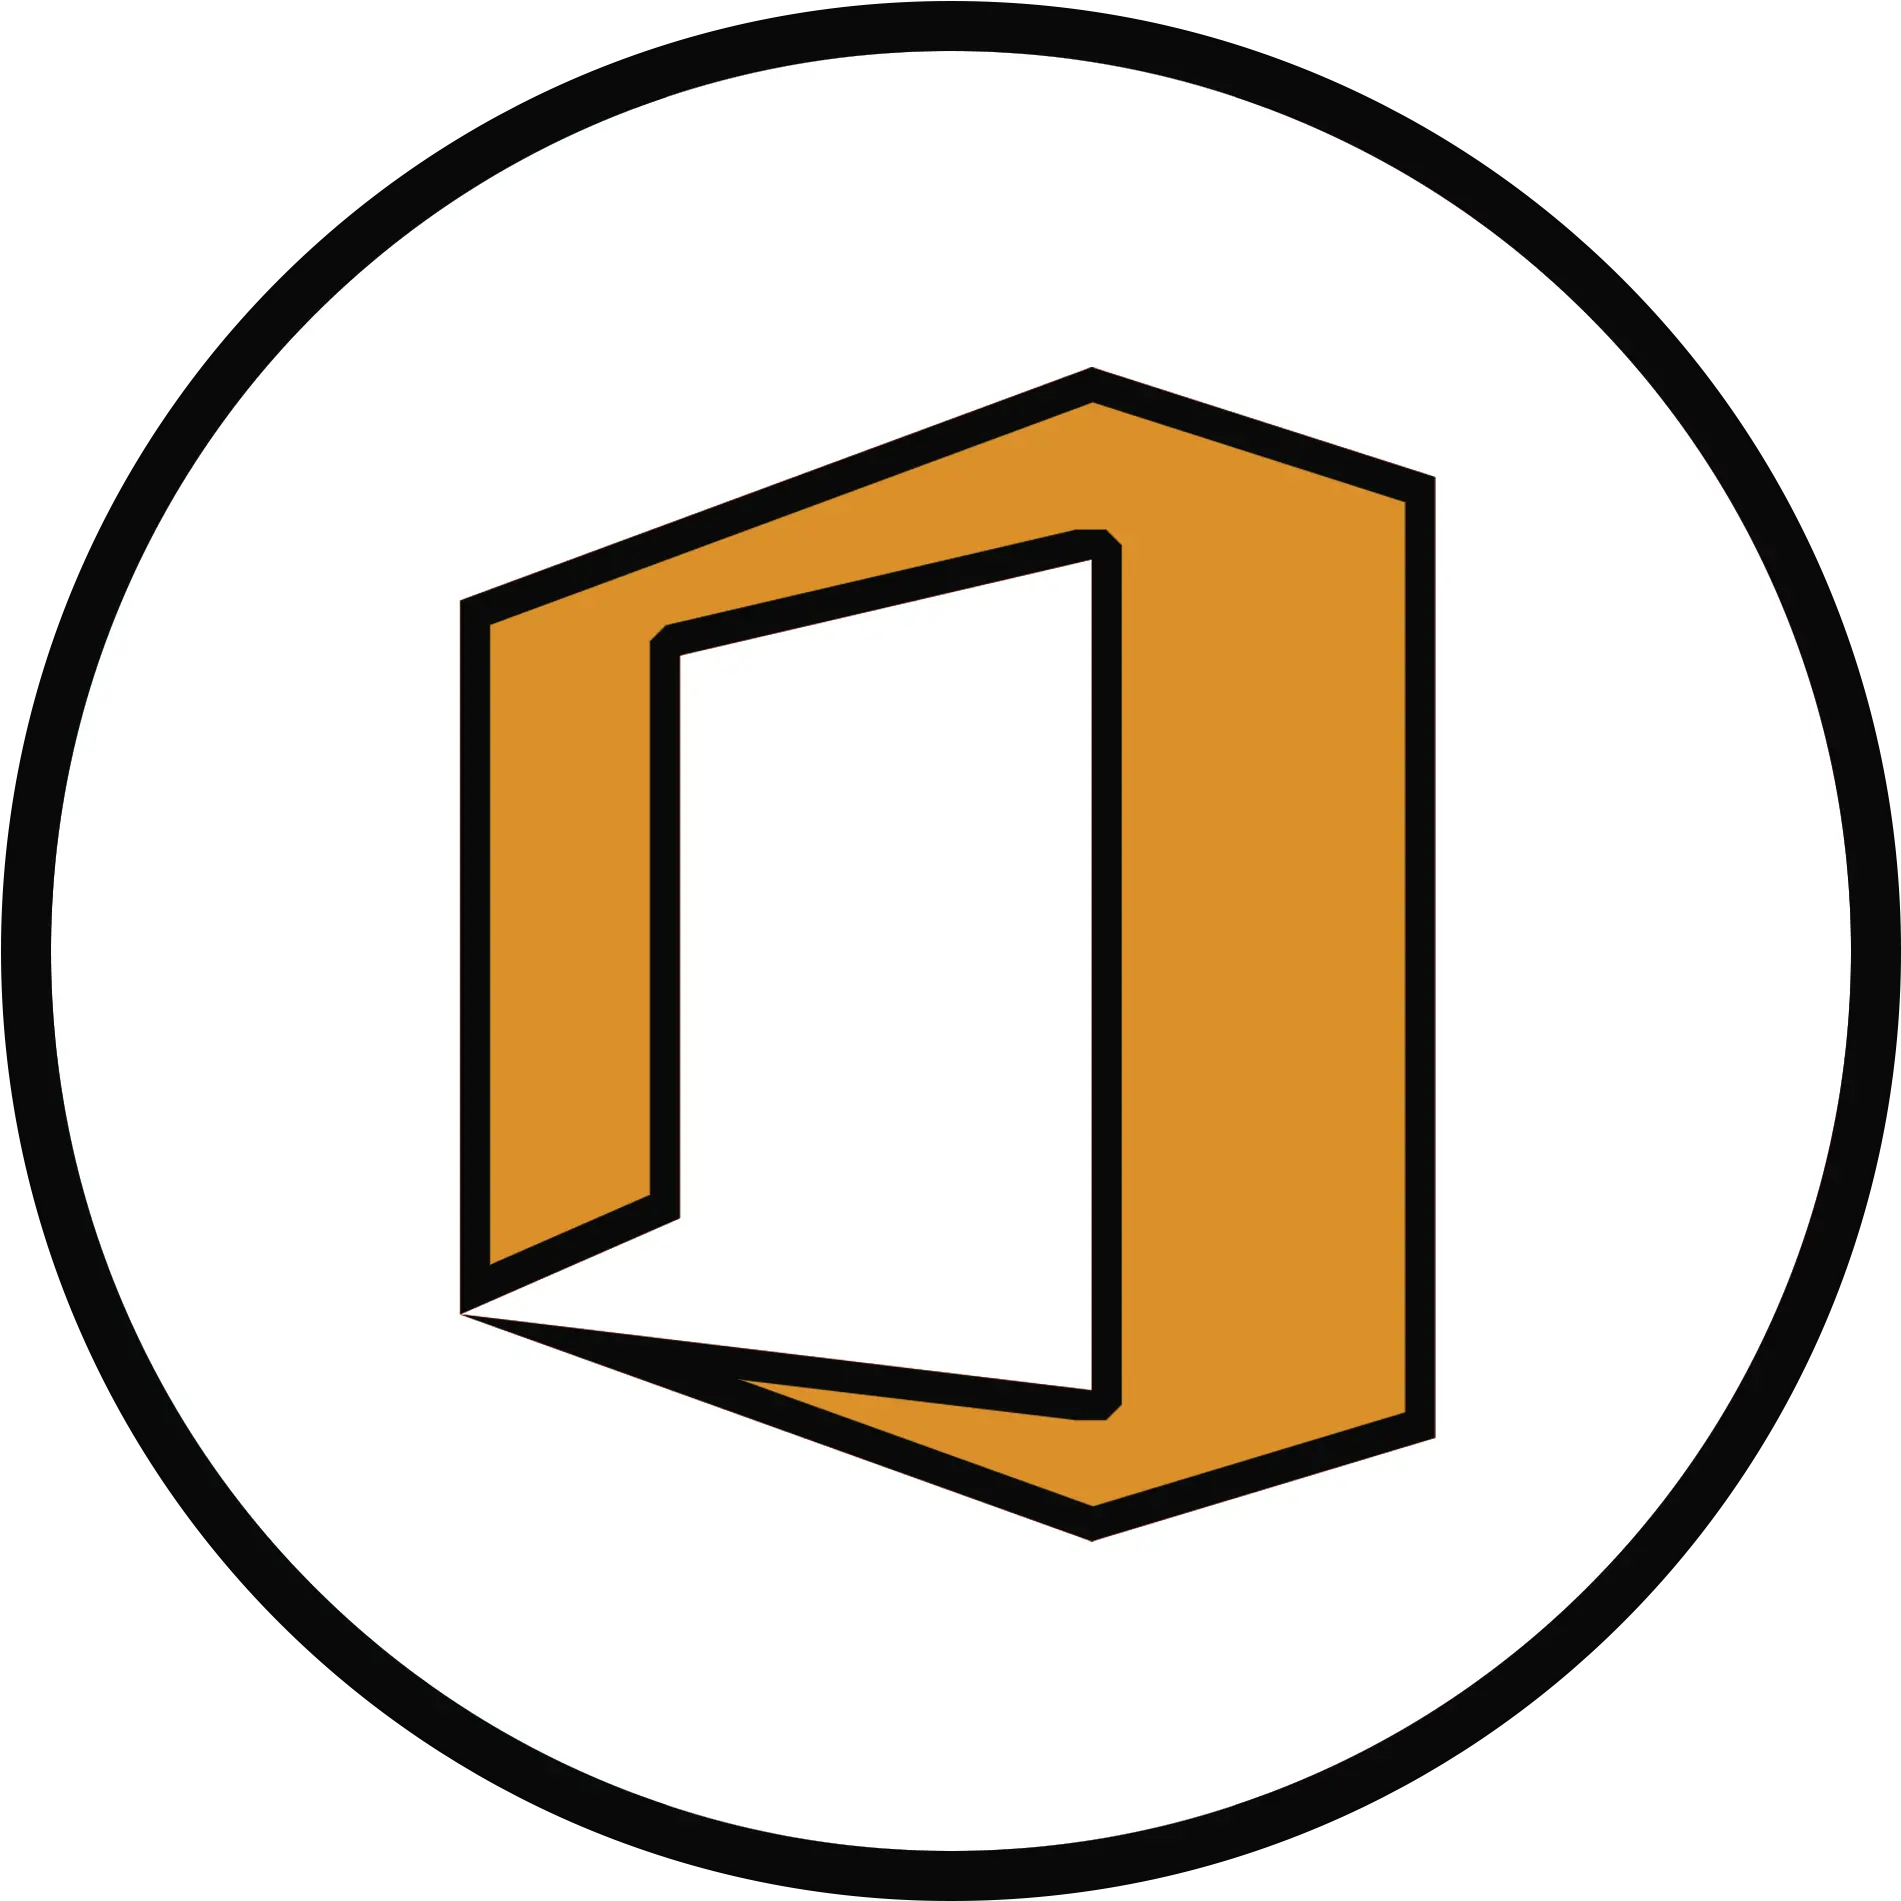 Filedeus Microsoft Office 2013 2019png Wikimedia Commons Ms Office Icon